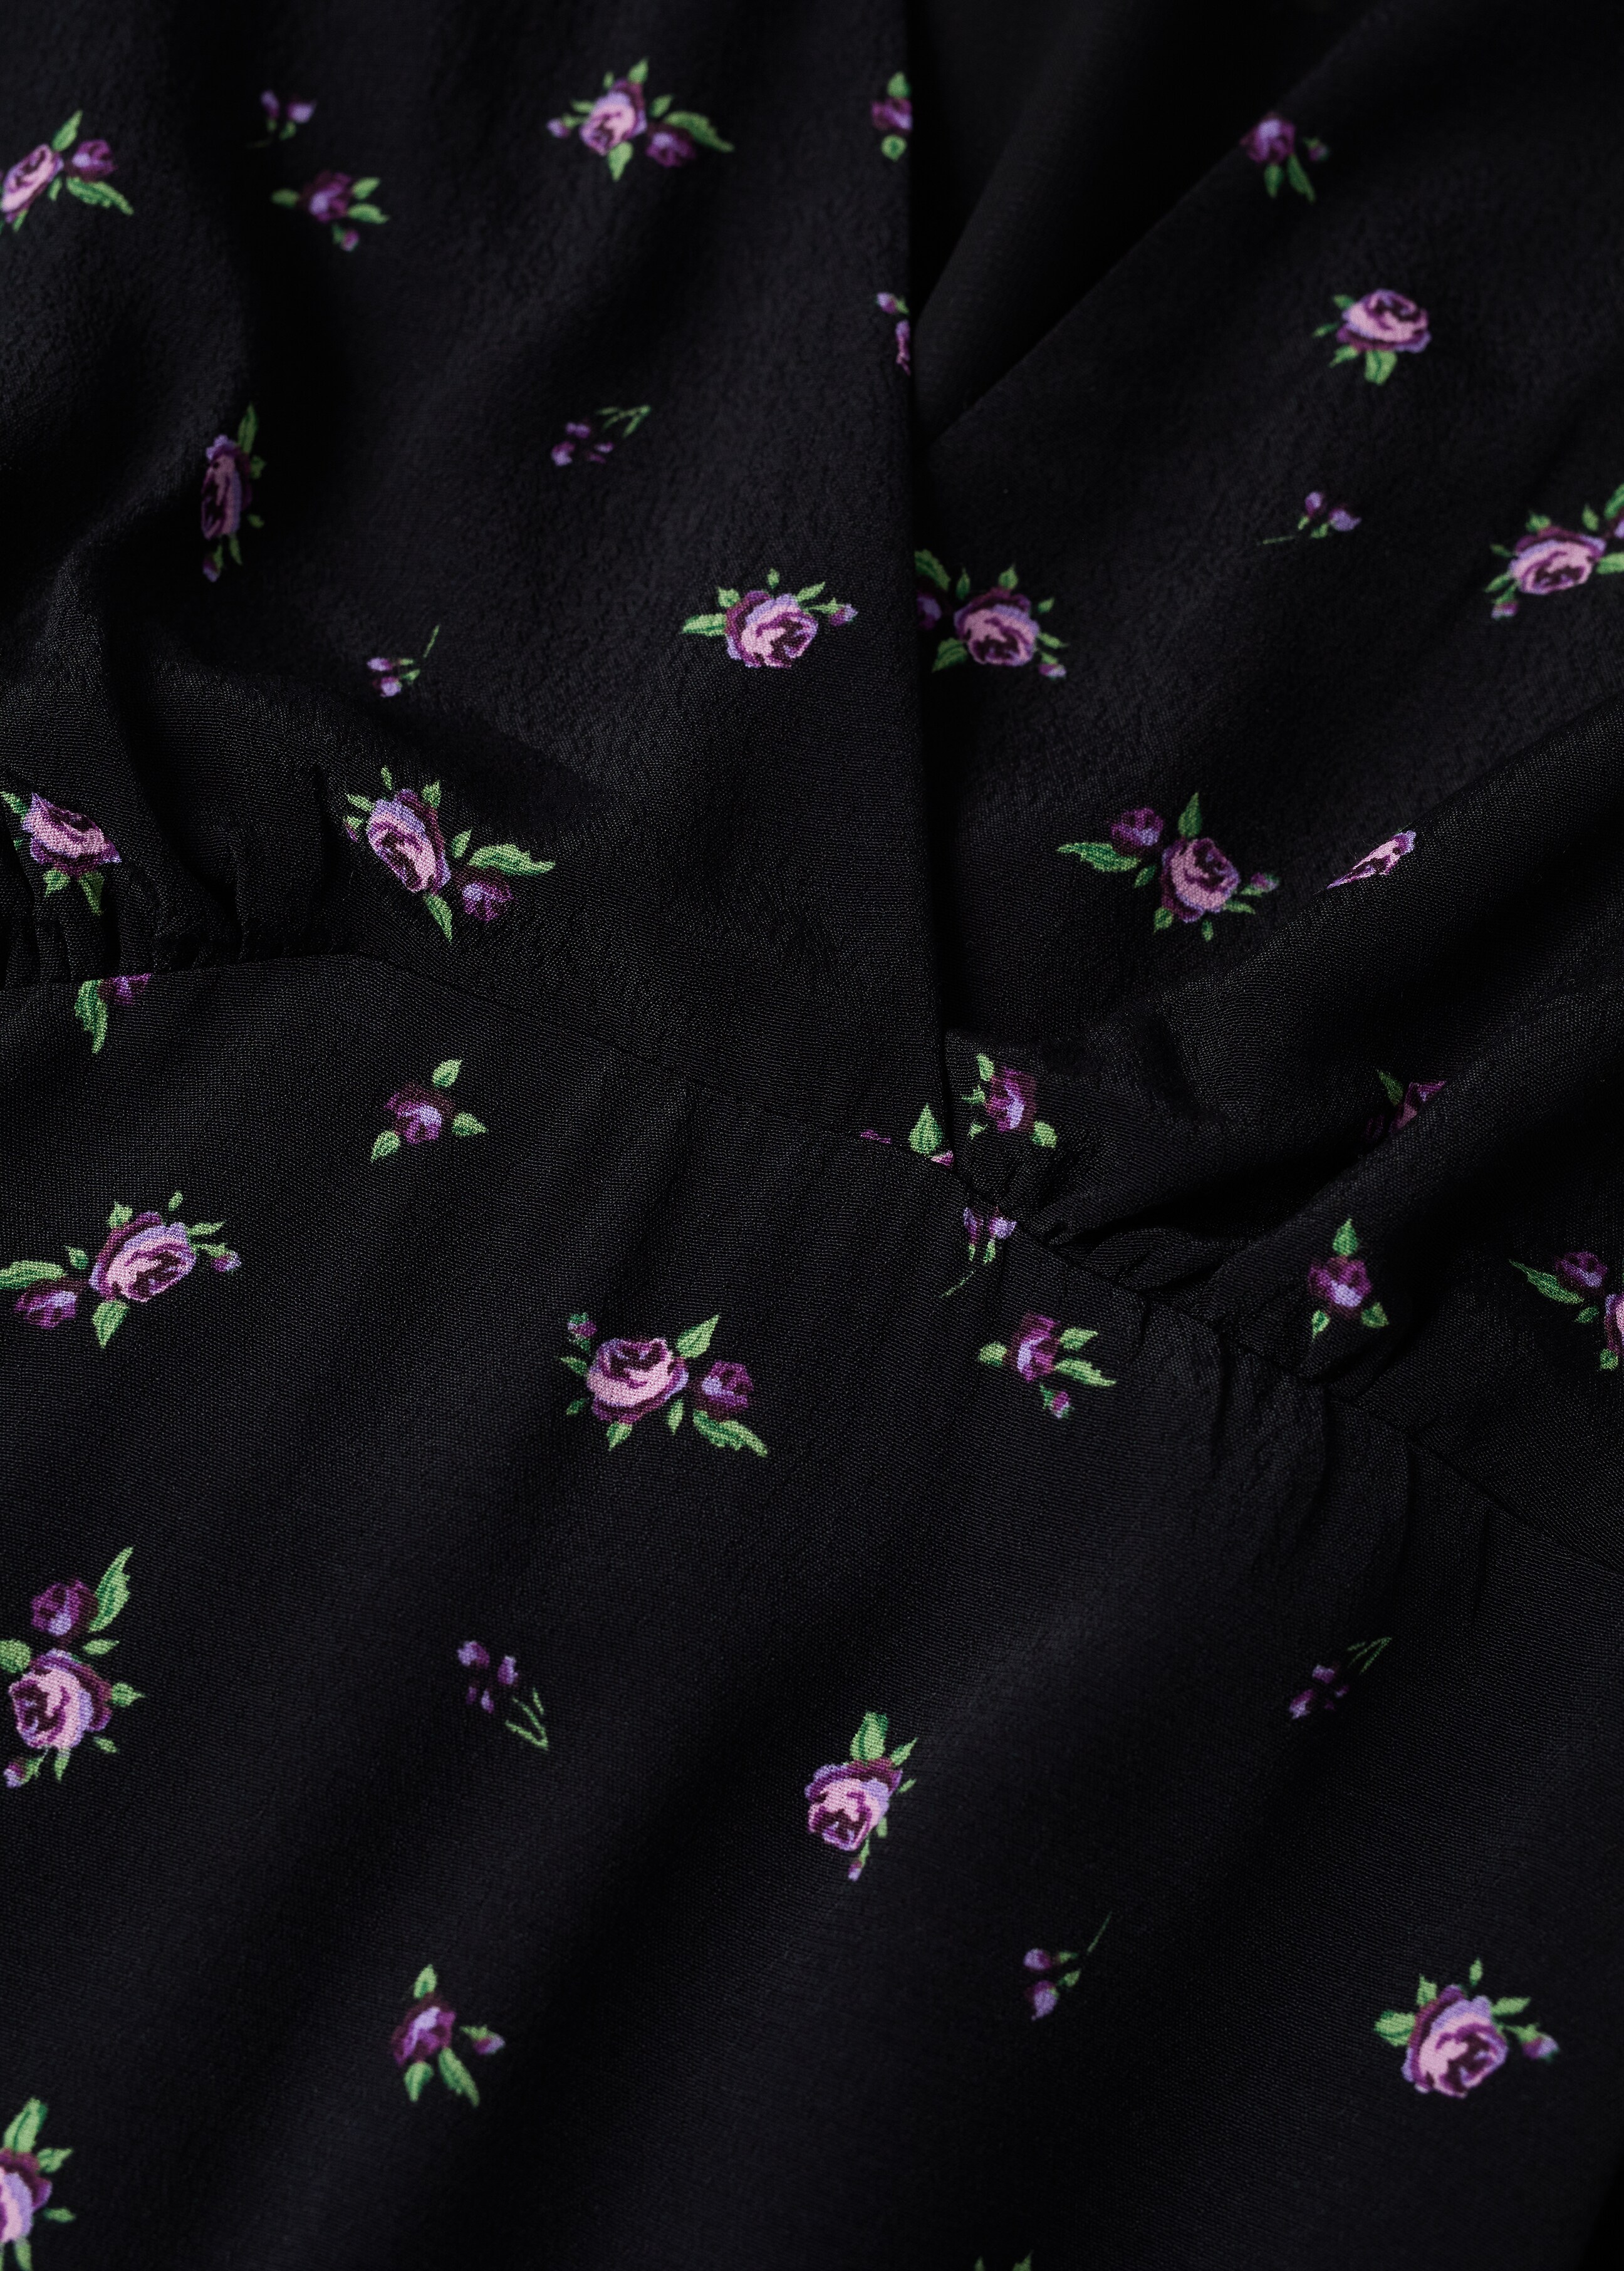 Floral print dress - Details of the article 8